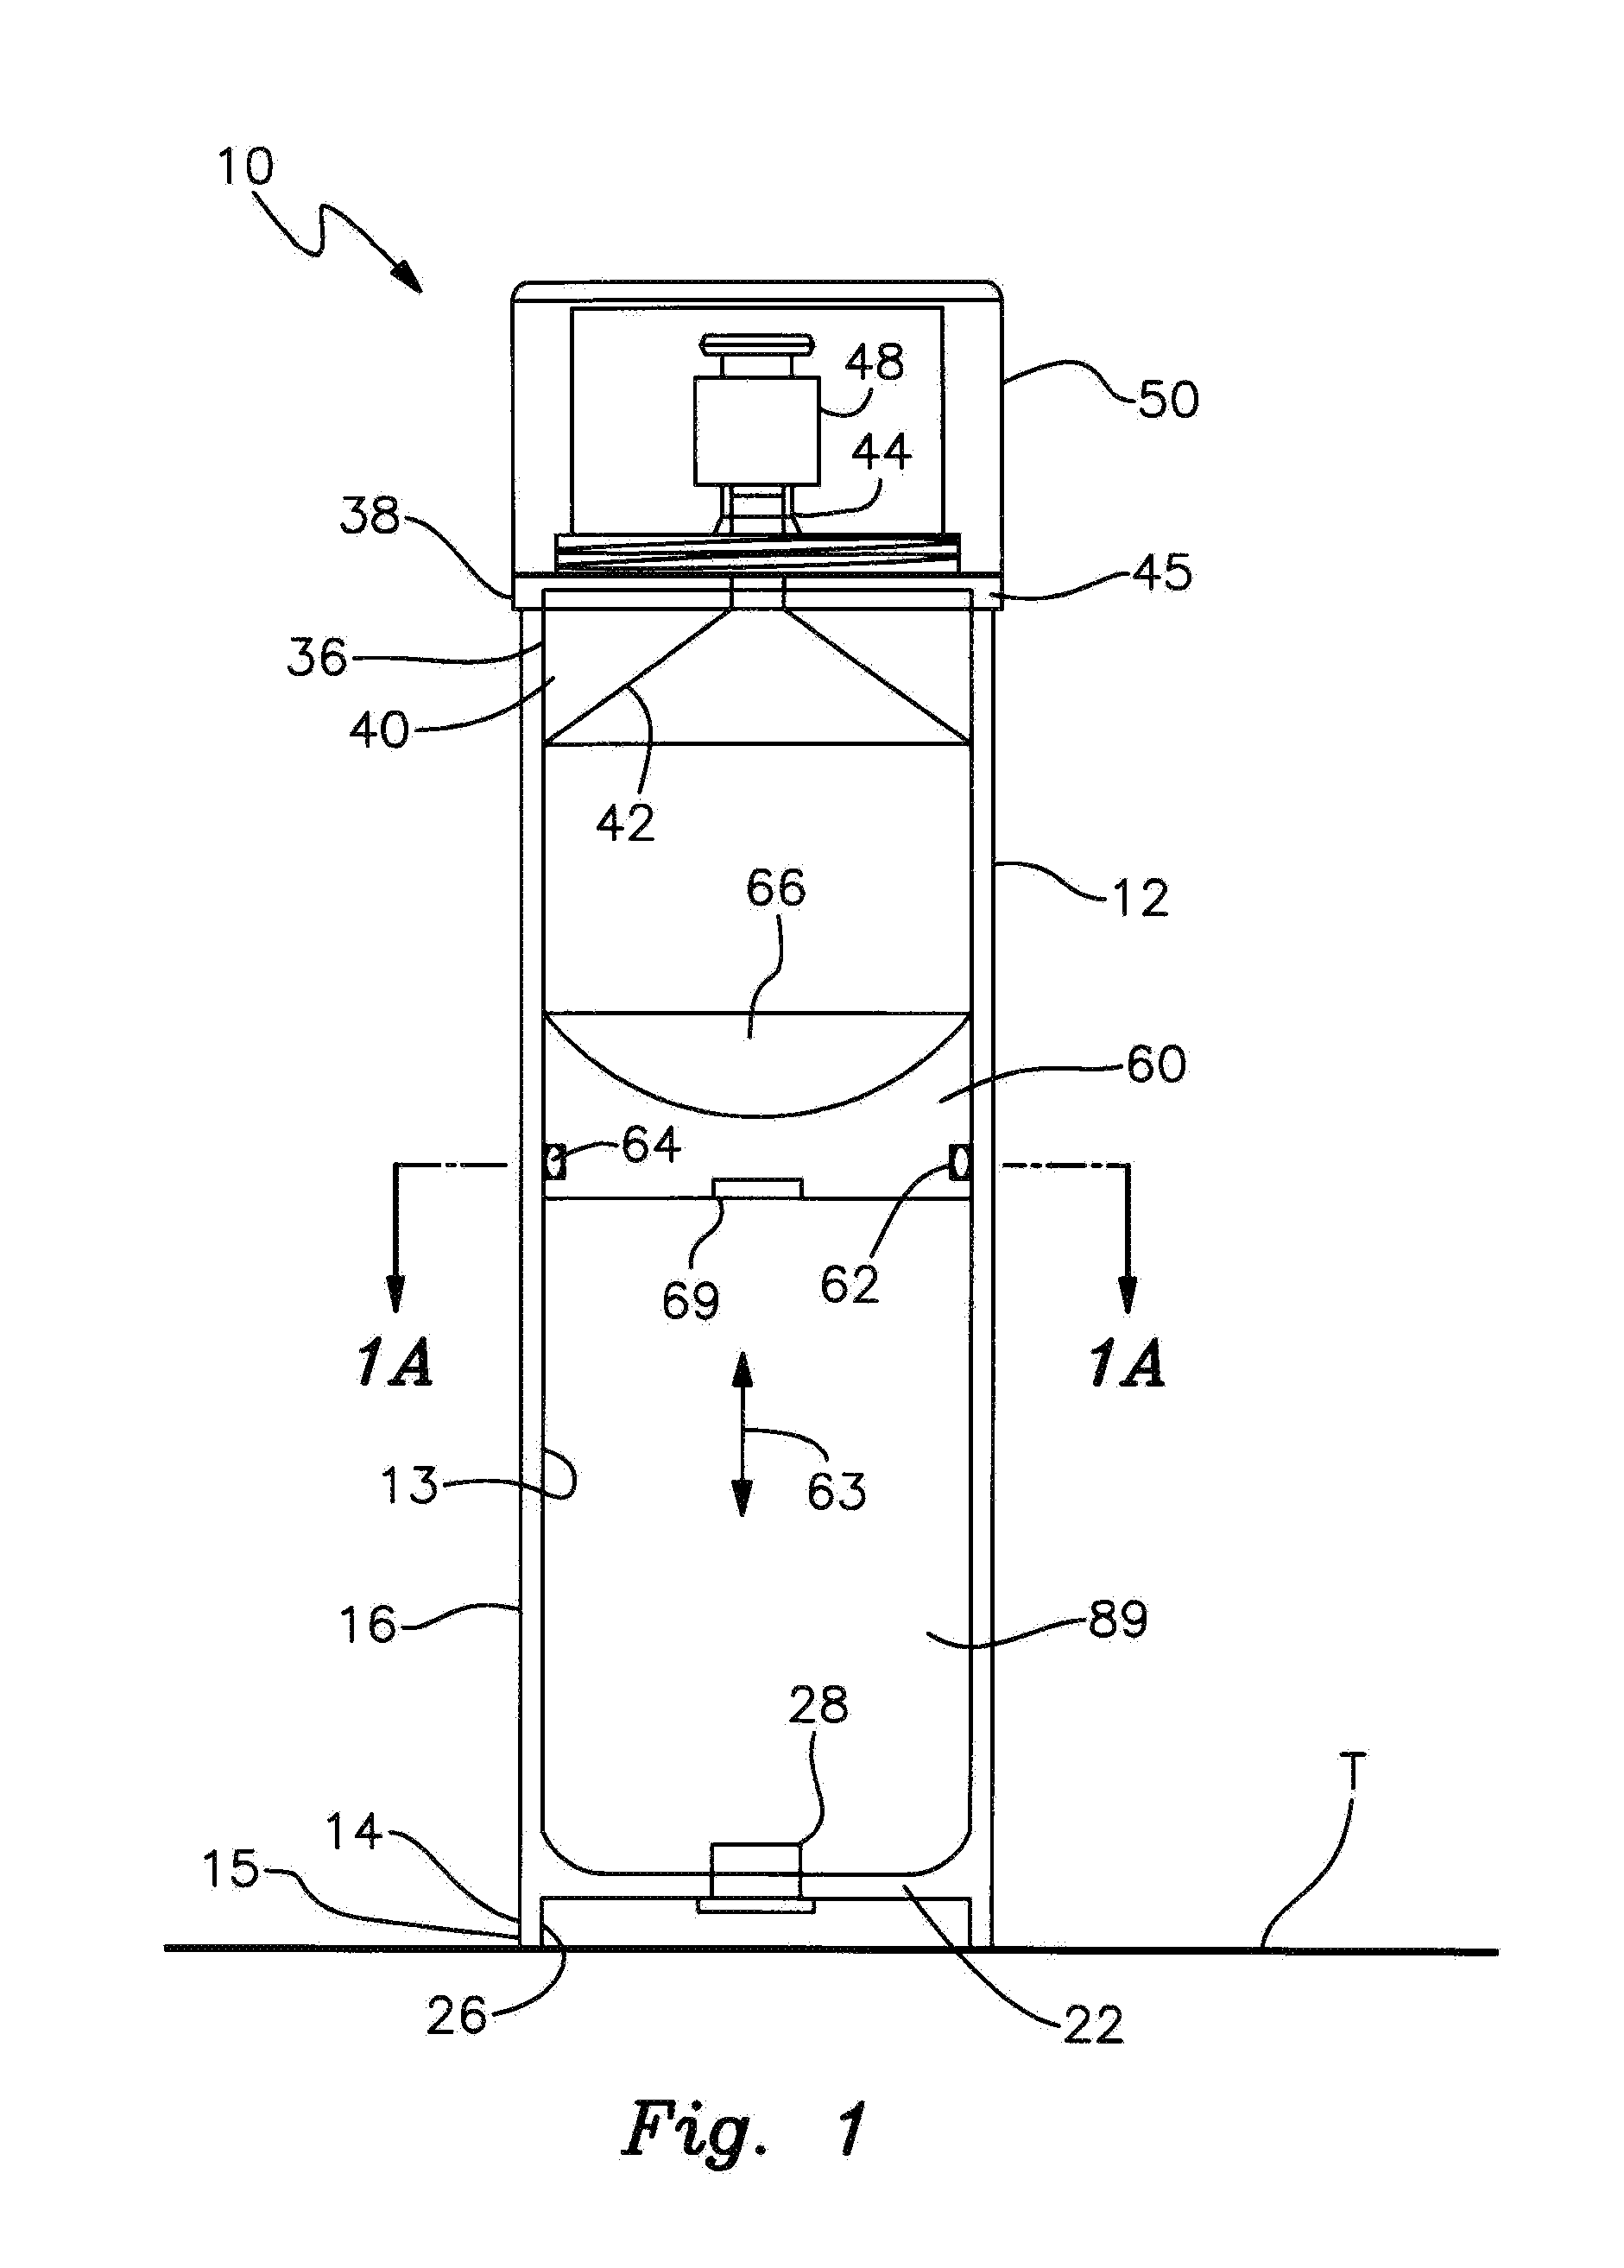 Centrifuge Tube Assembly for Separating, Concentrating and Aspirating Constituents of a Fluid Product